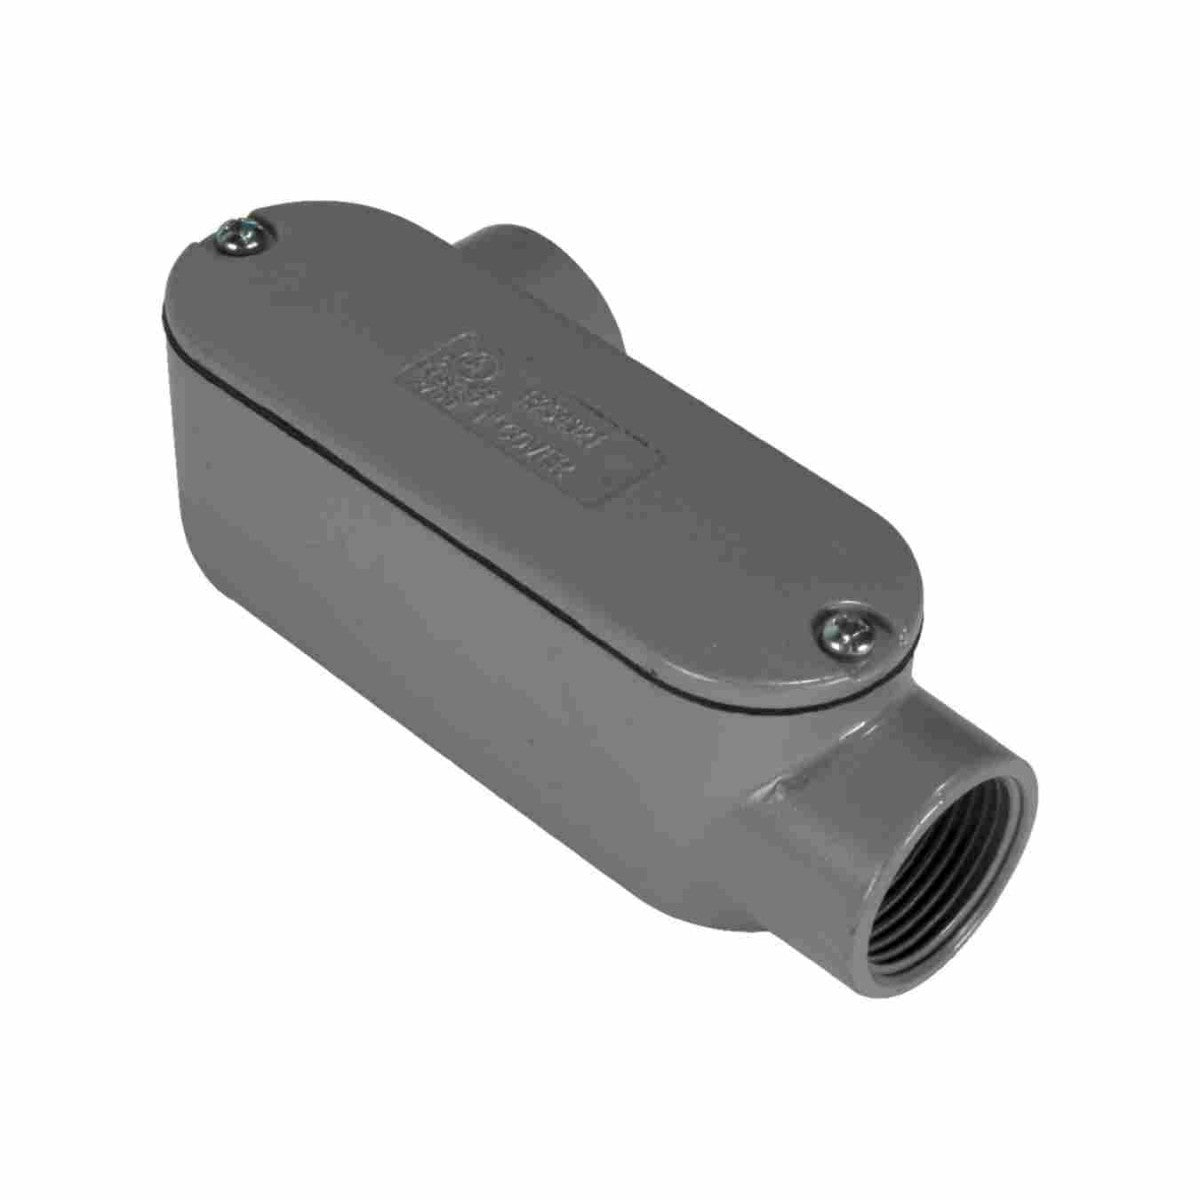 Orbit LL-50A Conduit Body, 1/2" Threaded Die Cast Aluminum w/Cover & Gasket - Type LL - Sonic Electric